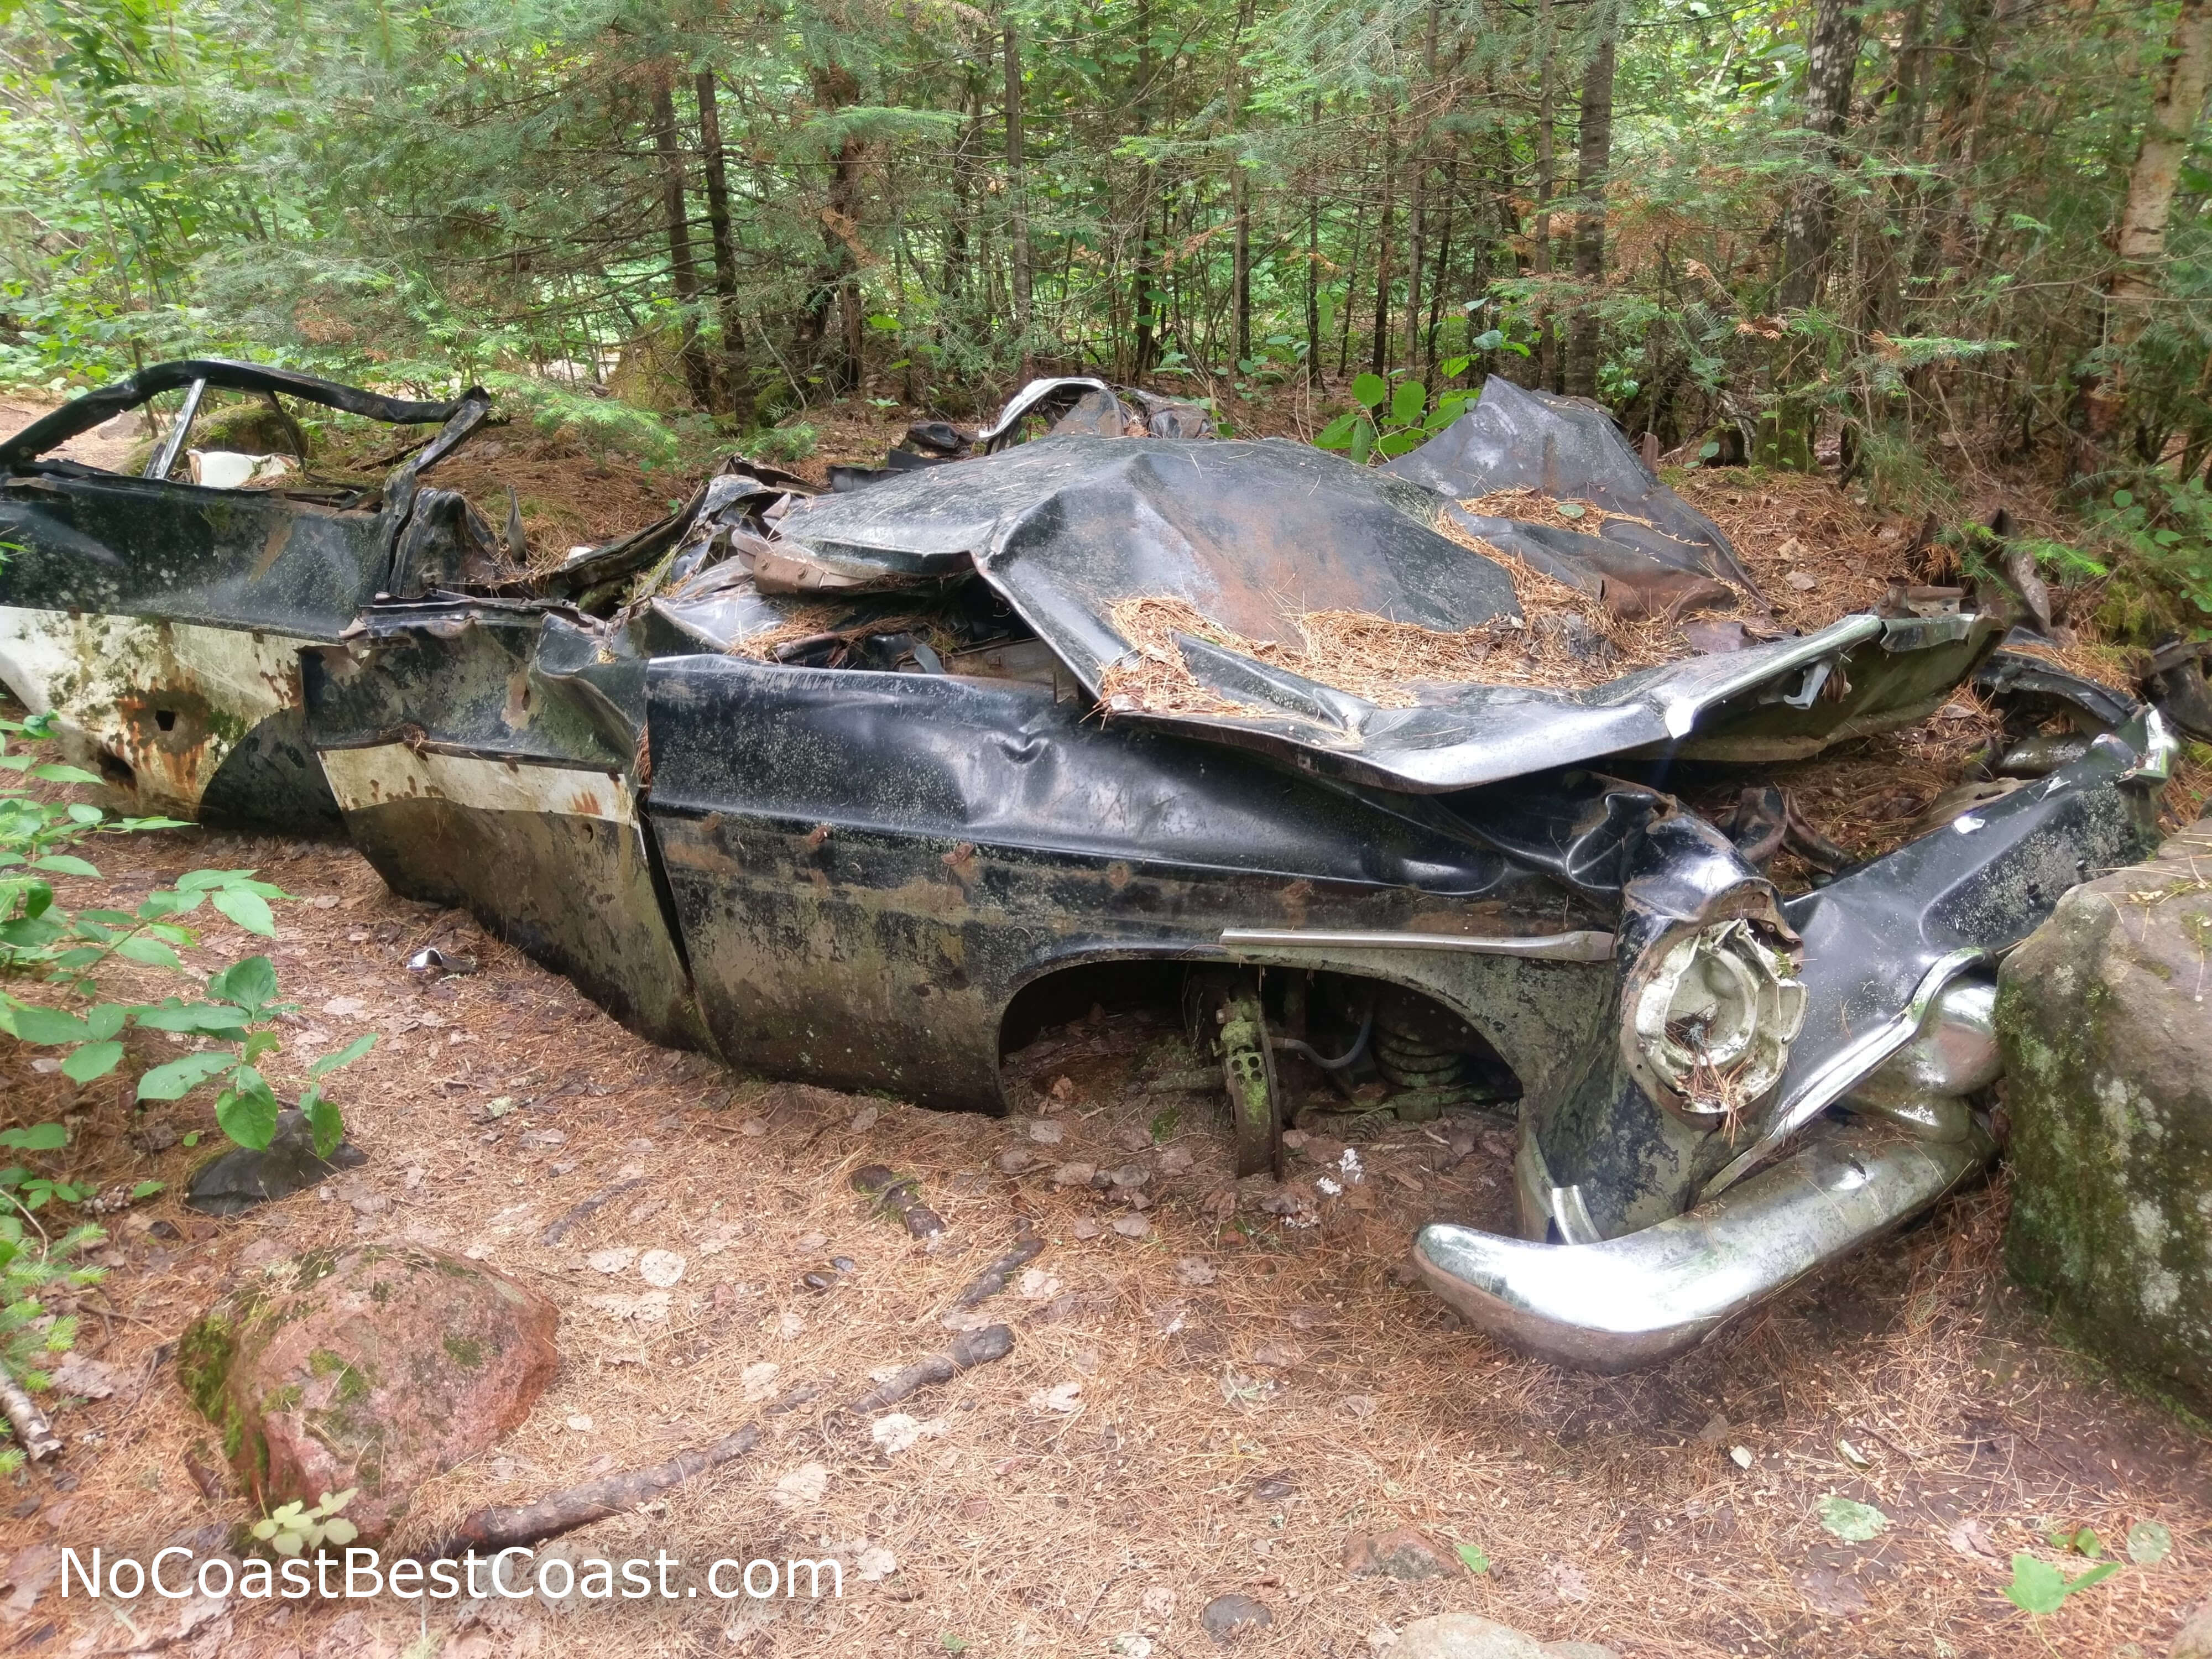 This wrecked old car is secretly the best part of the hike